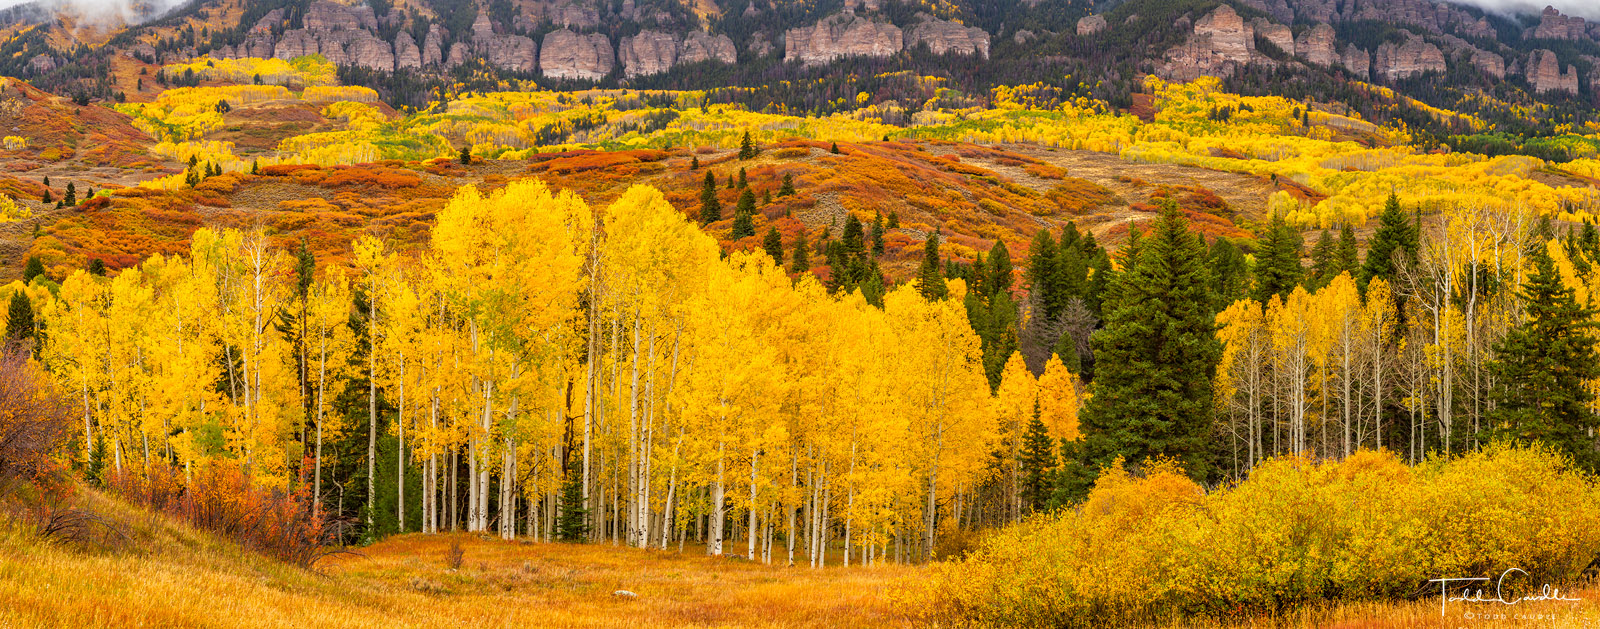 Slopes of the volcanic Cimarron Range burst with color as autumn colors take hold of the landscape.